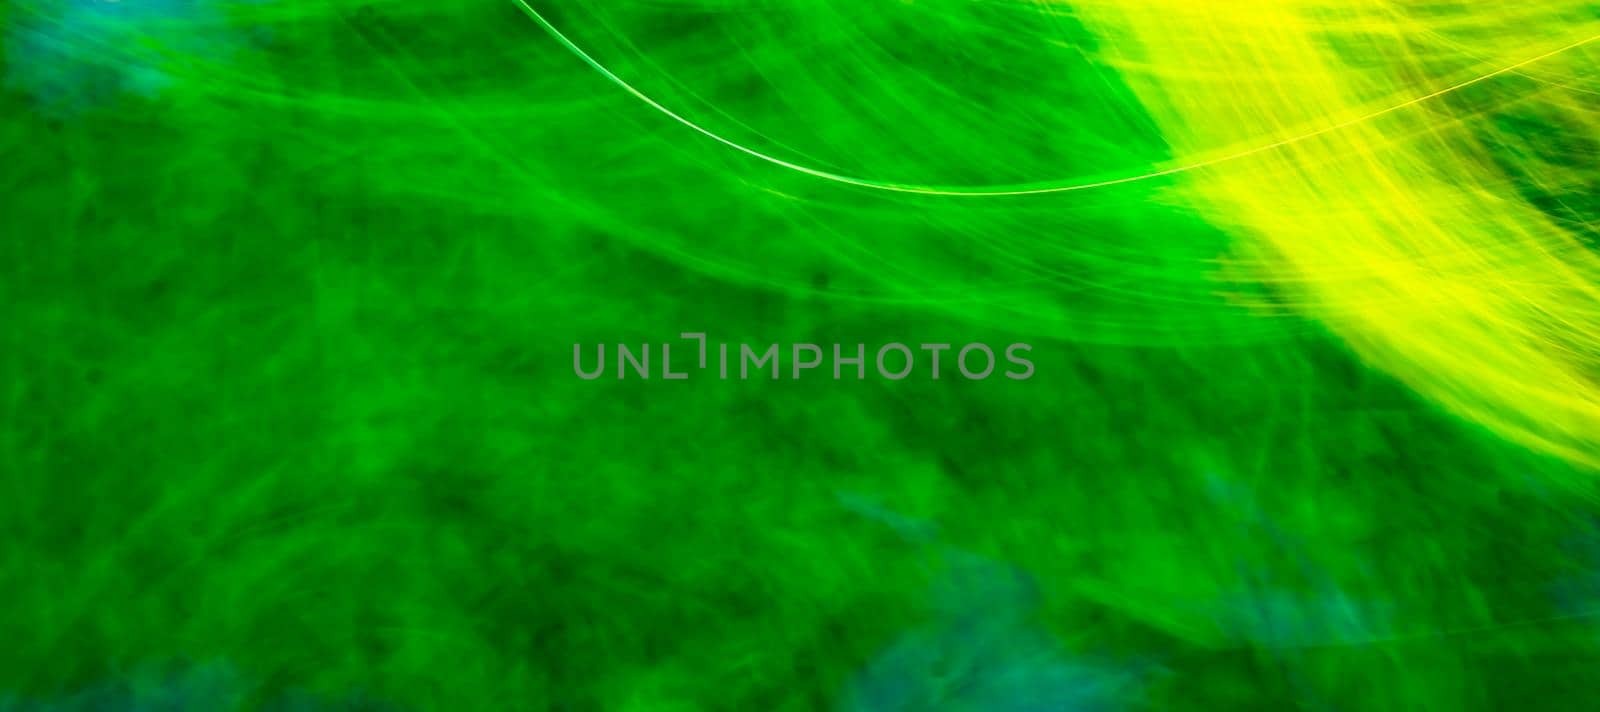 Abstract, bright green background with a yellow tint, glowing waves and lines by orebrik